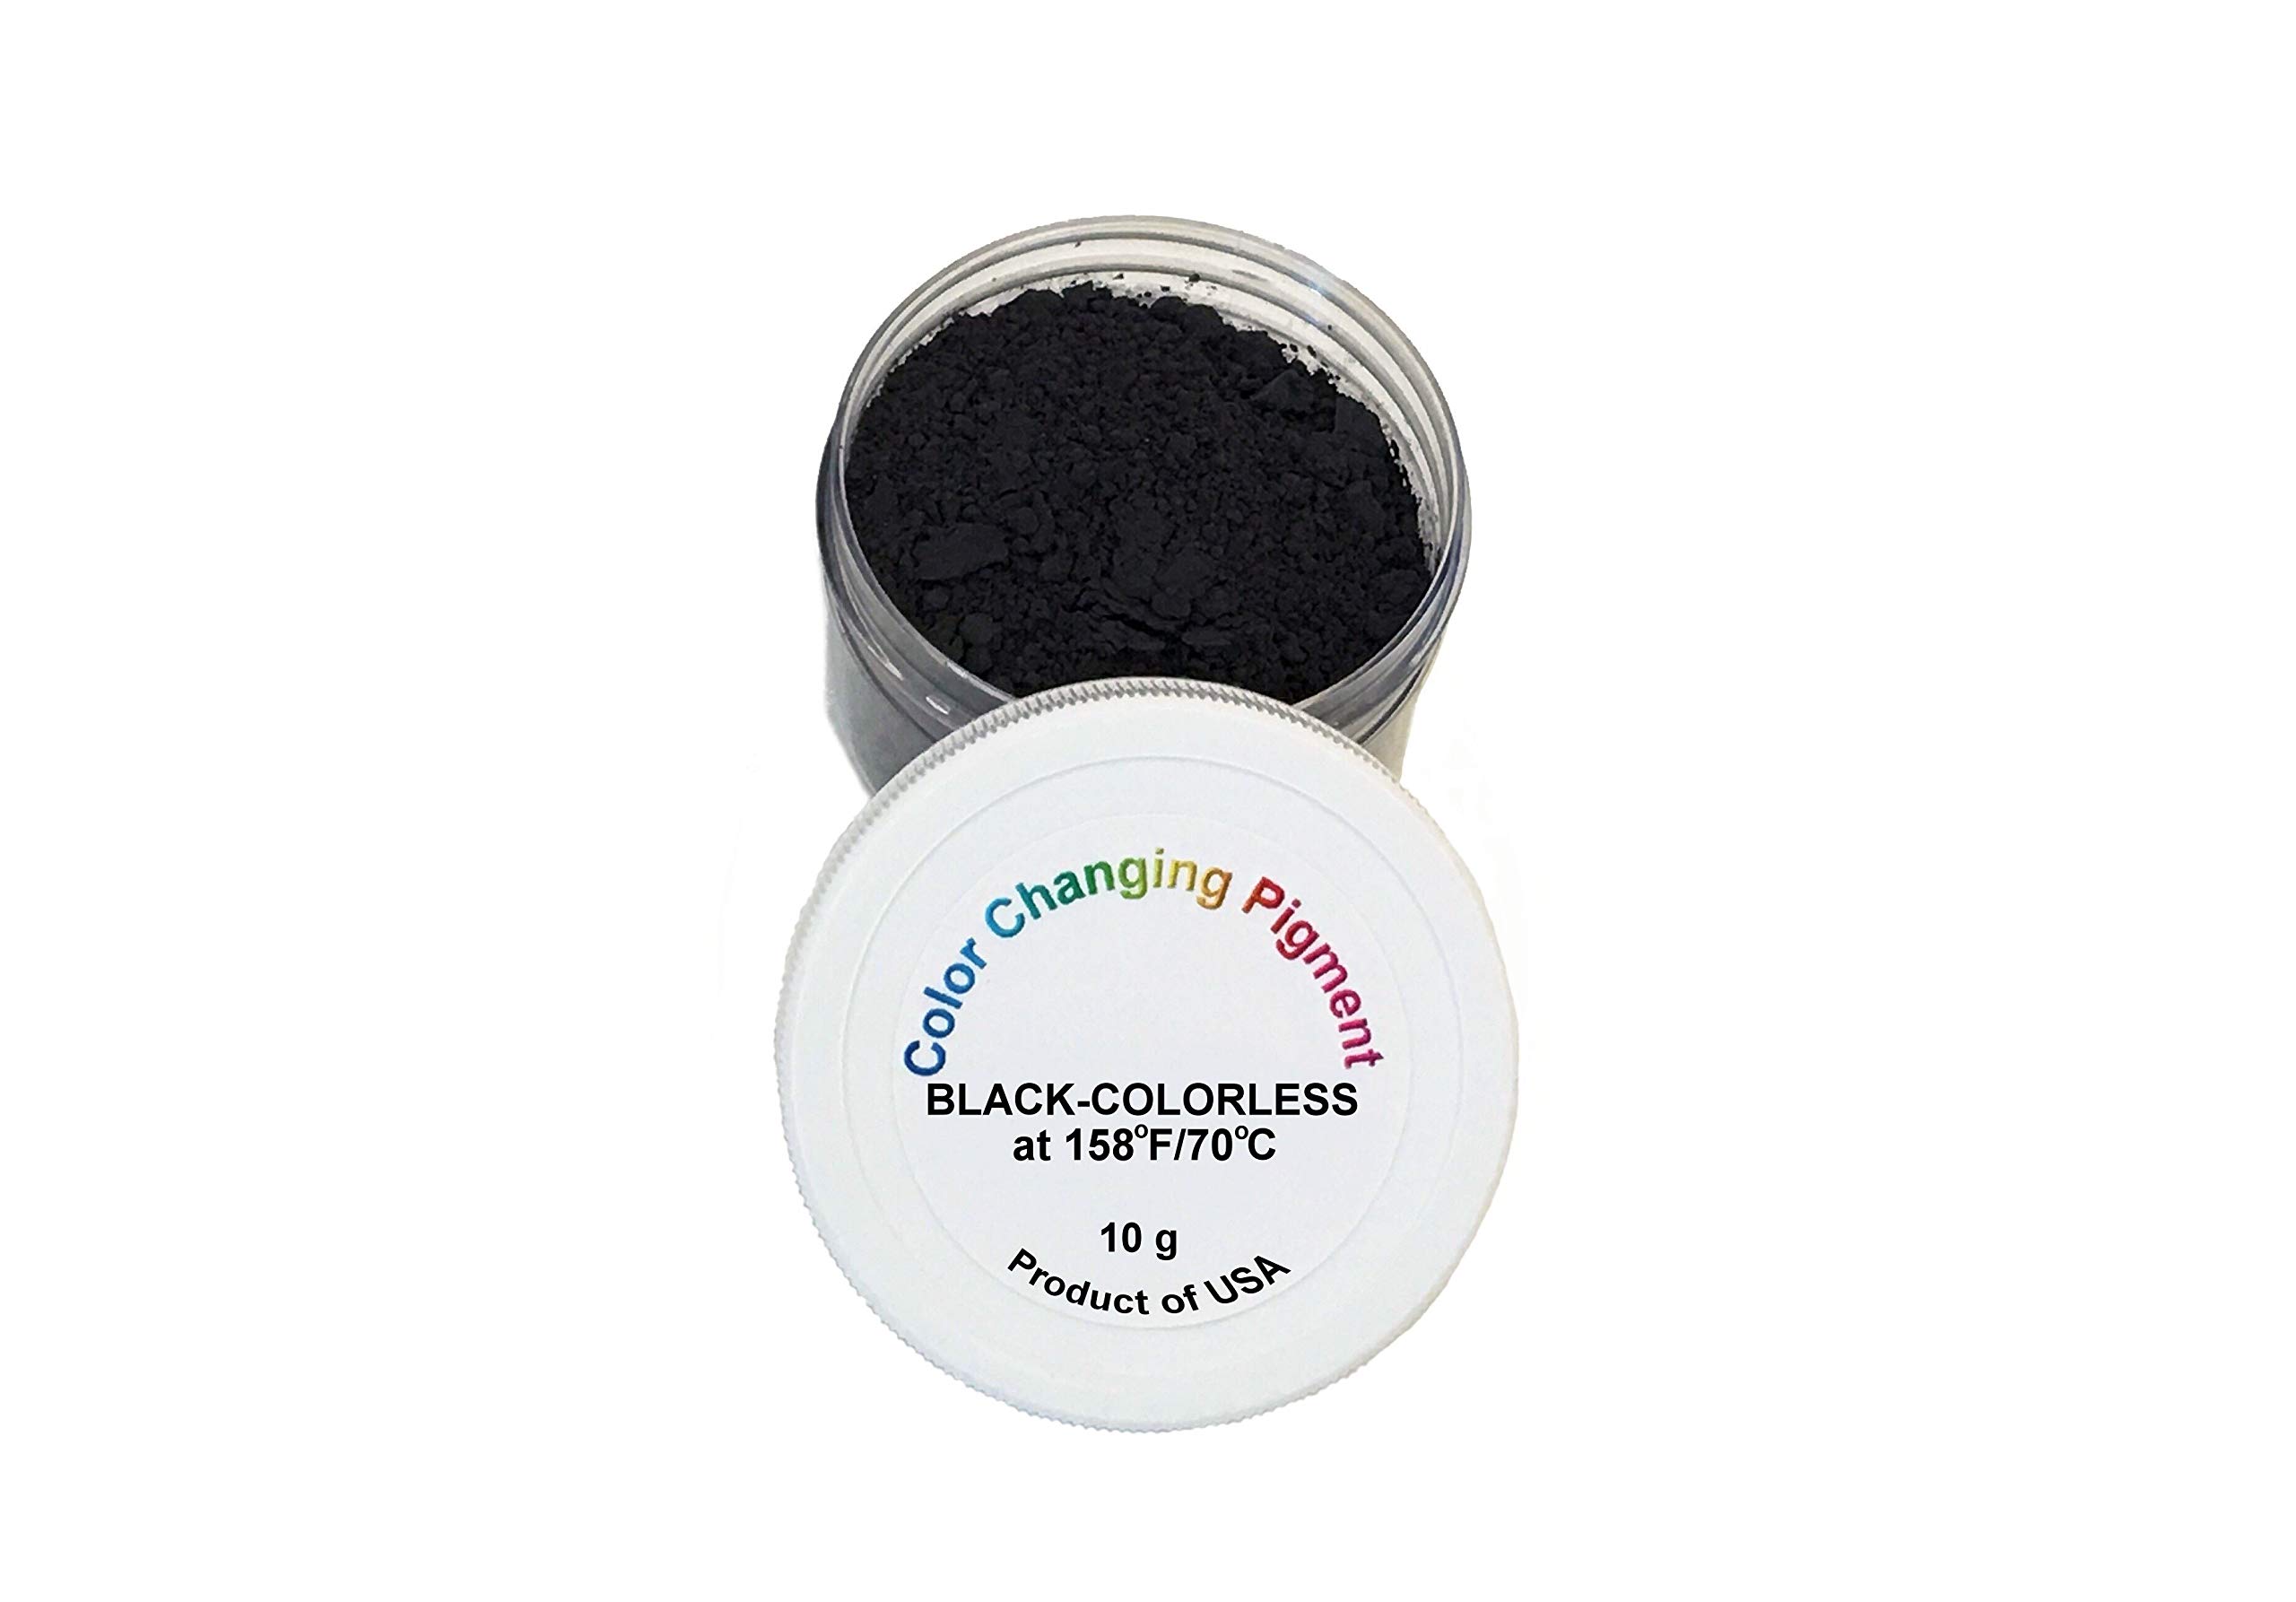 Buy Thermochromic Pigment Color Change Powder Pigment By